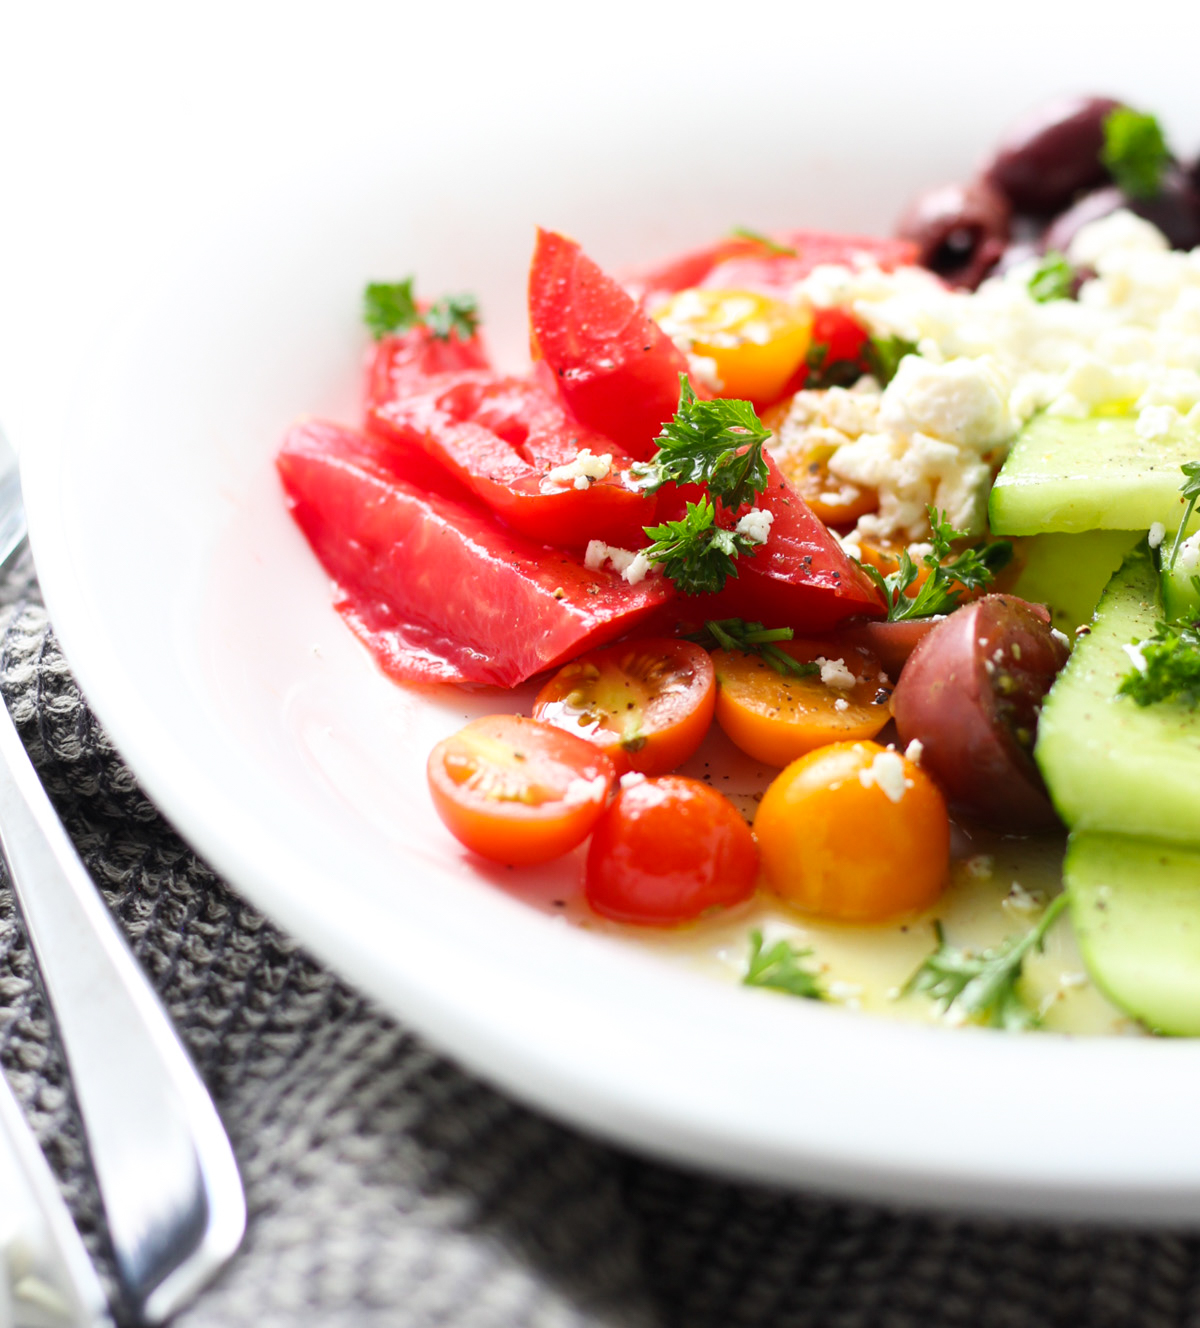 Greek salad with dressing on a white plate.